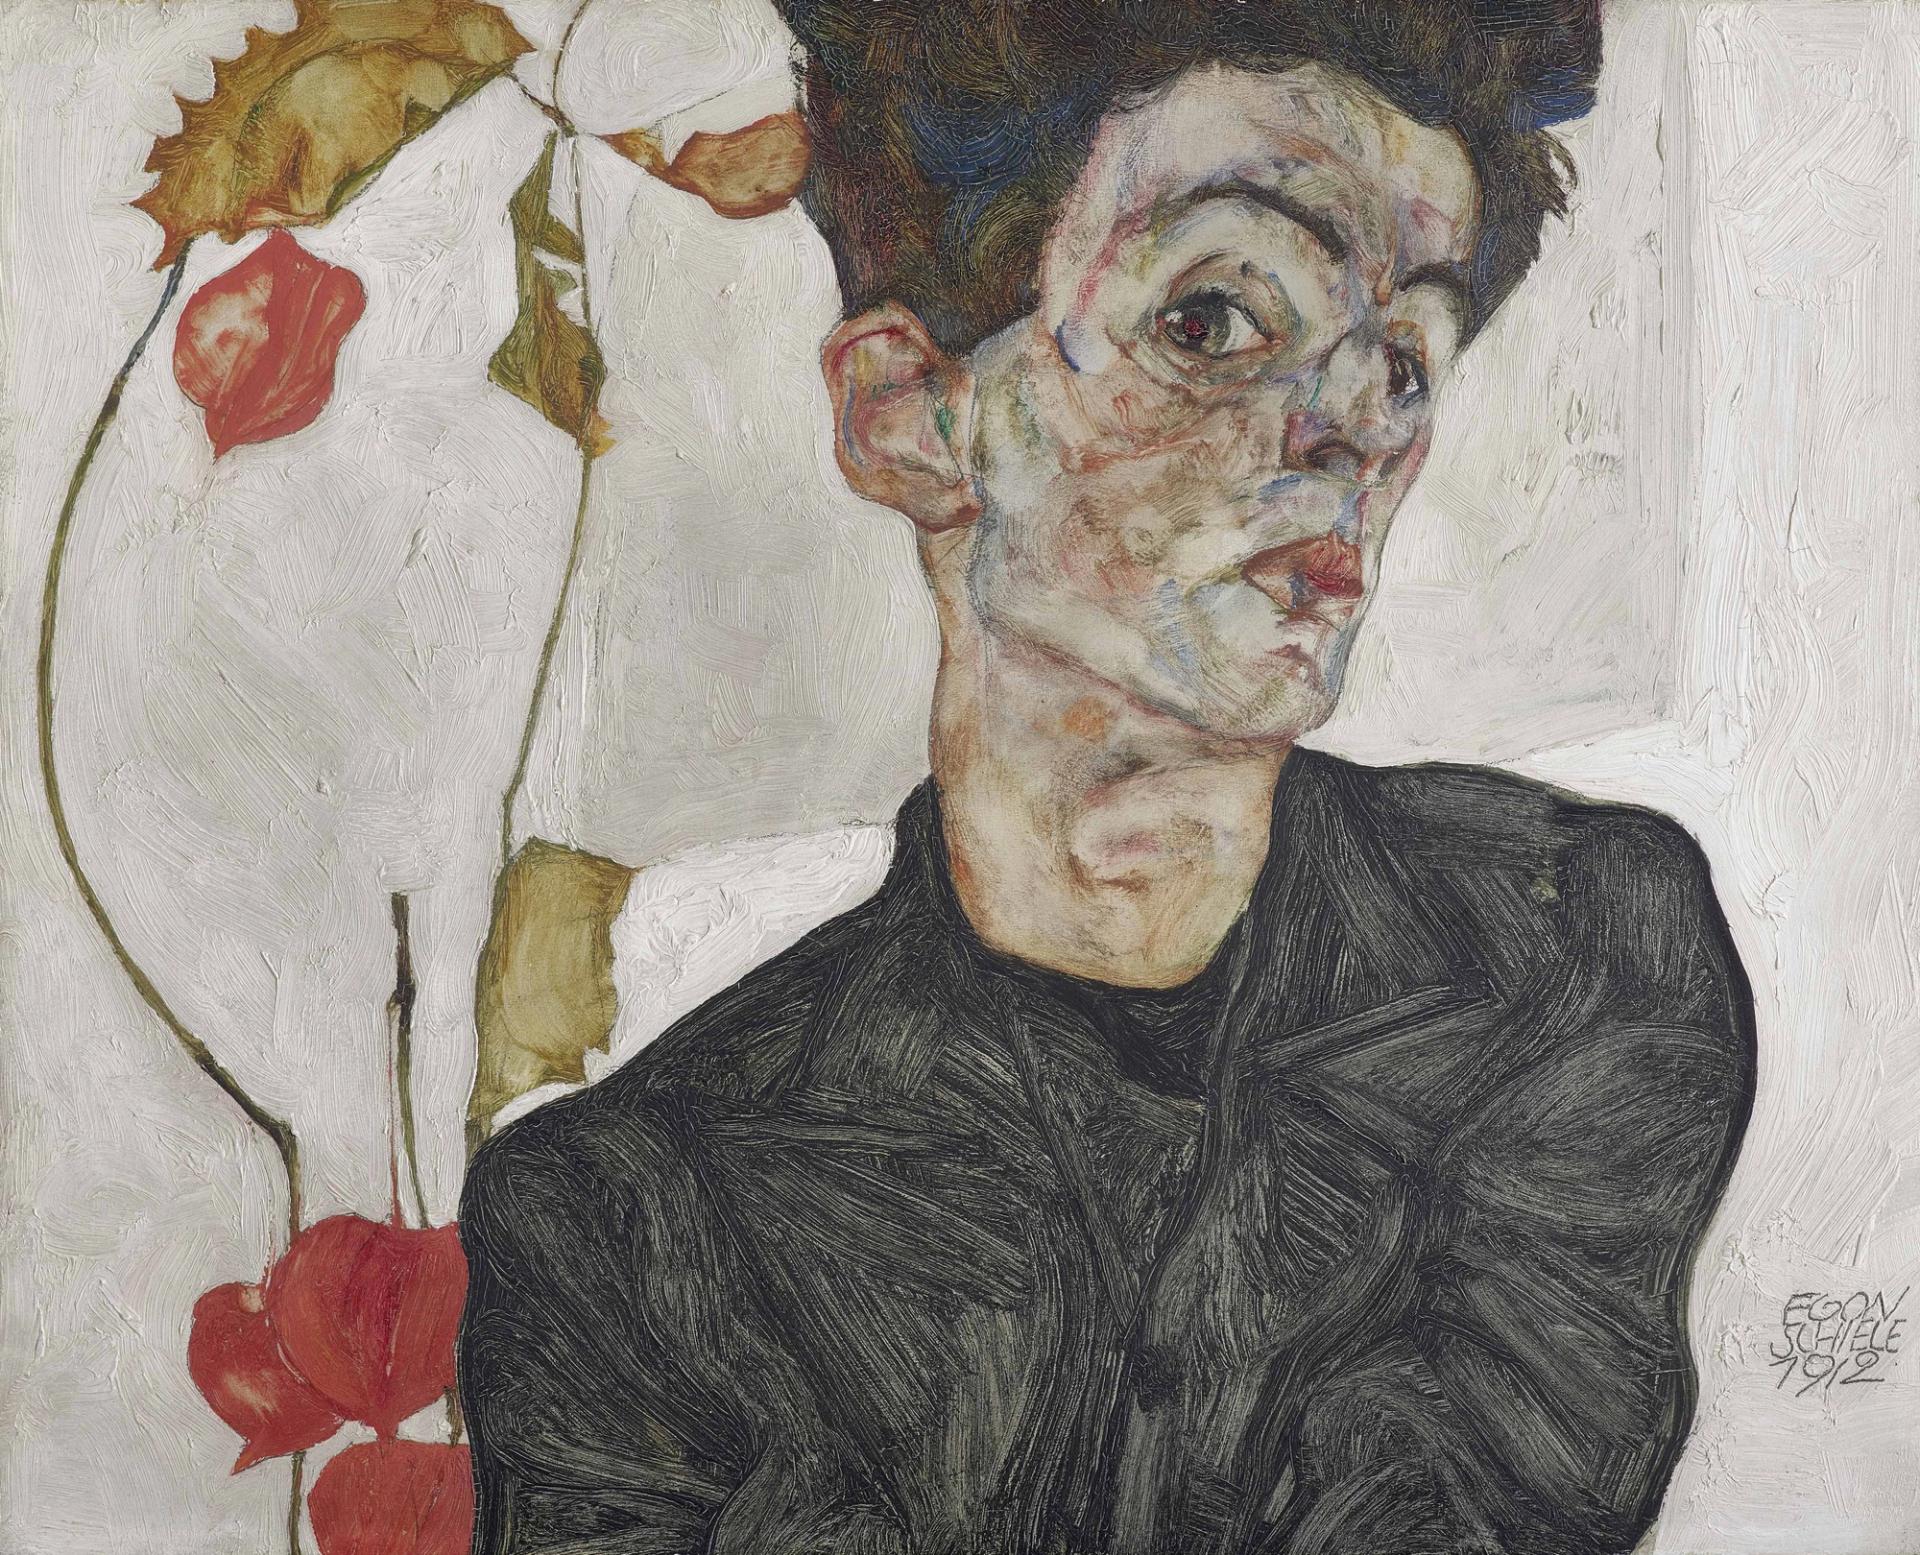 Self Portrait with Chinese Lantern Plant (1912) by Egon Schiele. The Austrian artist painted many self portraits during his short life Courtesy Tokyo metropolitan museum of art